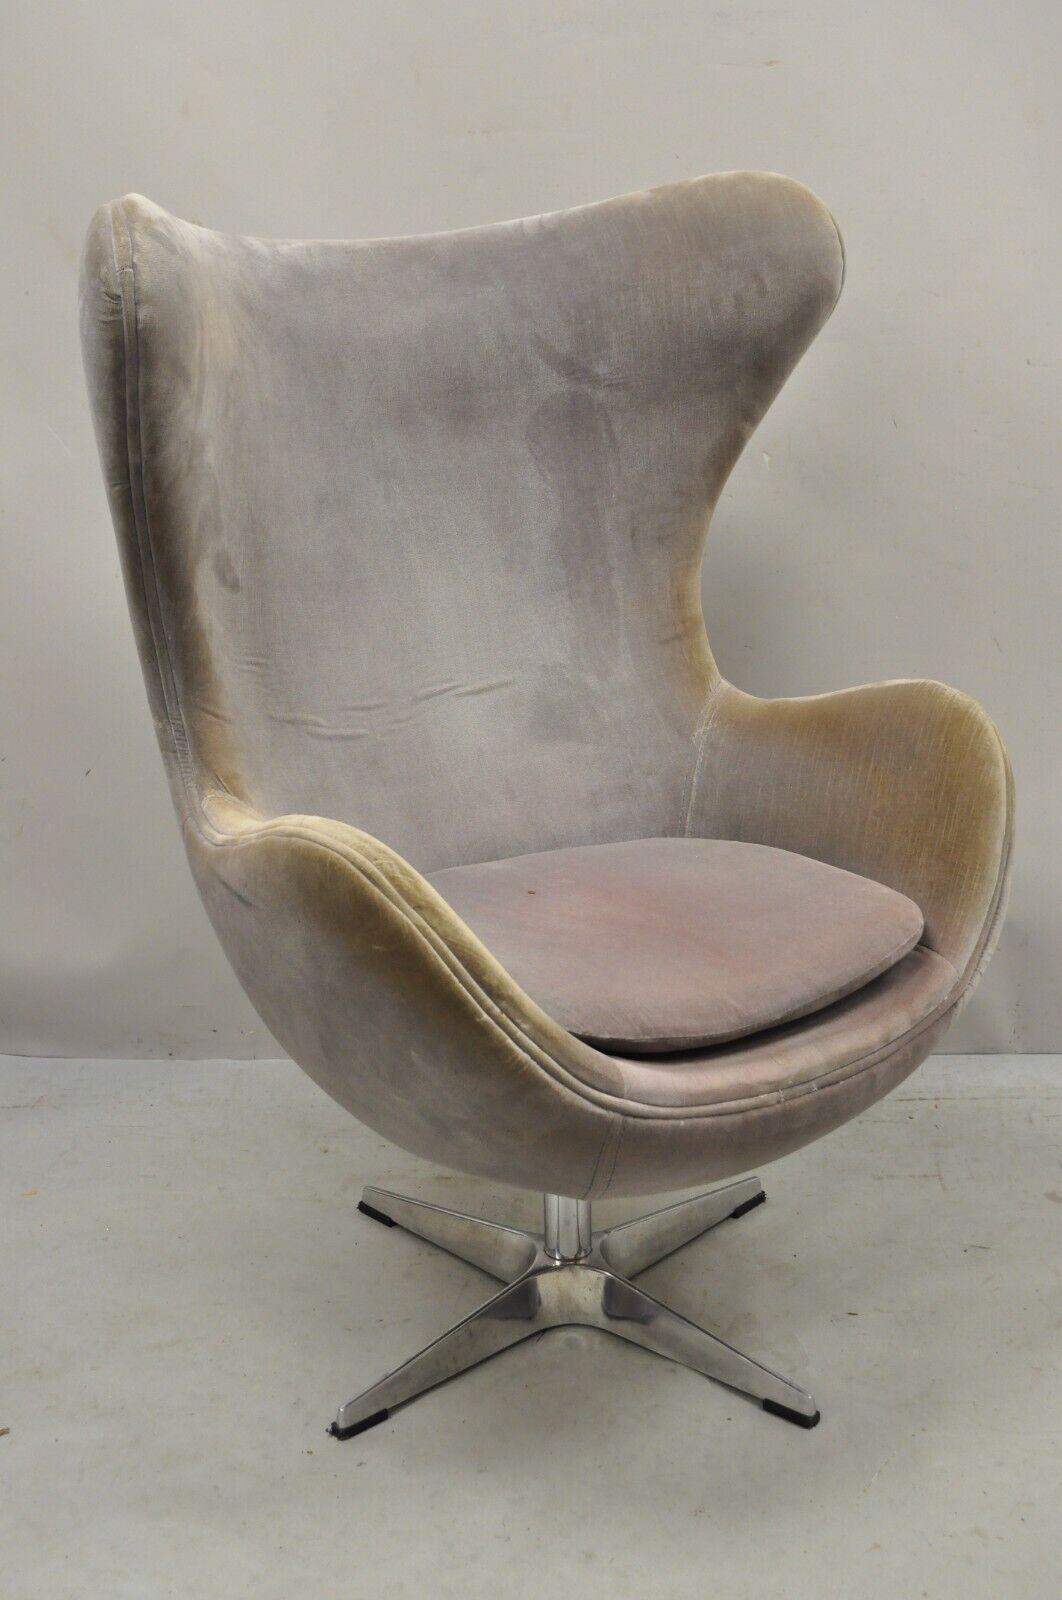 Modern Arne Jacobsen Style Upholstered Egg Lounge Swivel club chair. Item featured in the style of the original Arne Jacobsen design, clean Modernist lines, great style and comfortable form. Circa Late 20th to 21st Century. Measurements: 45